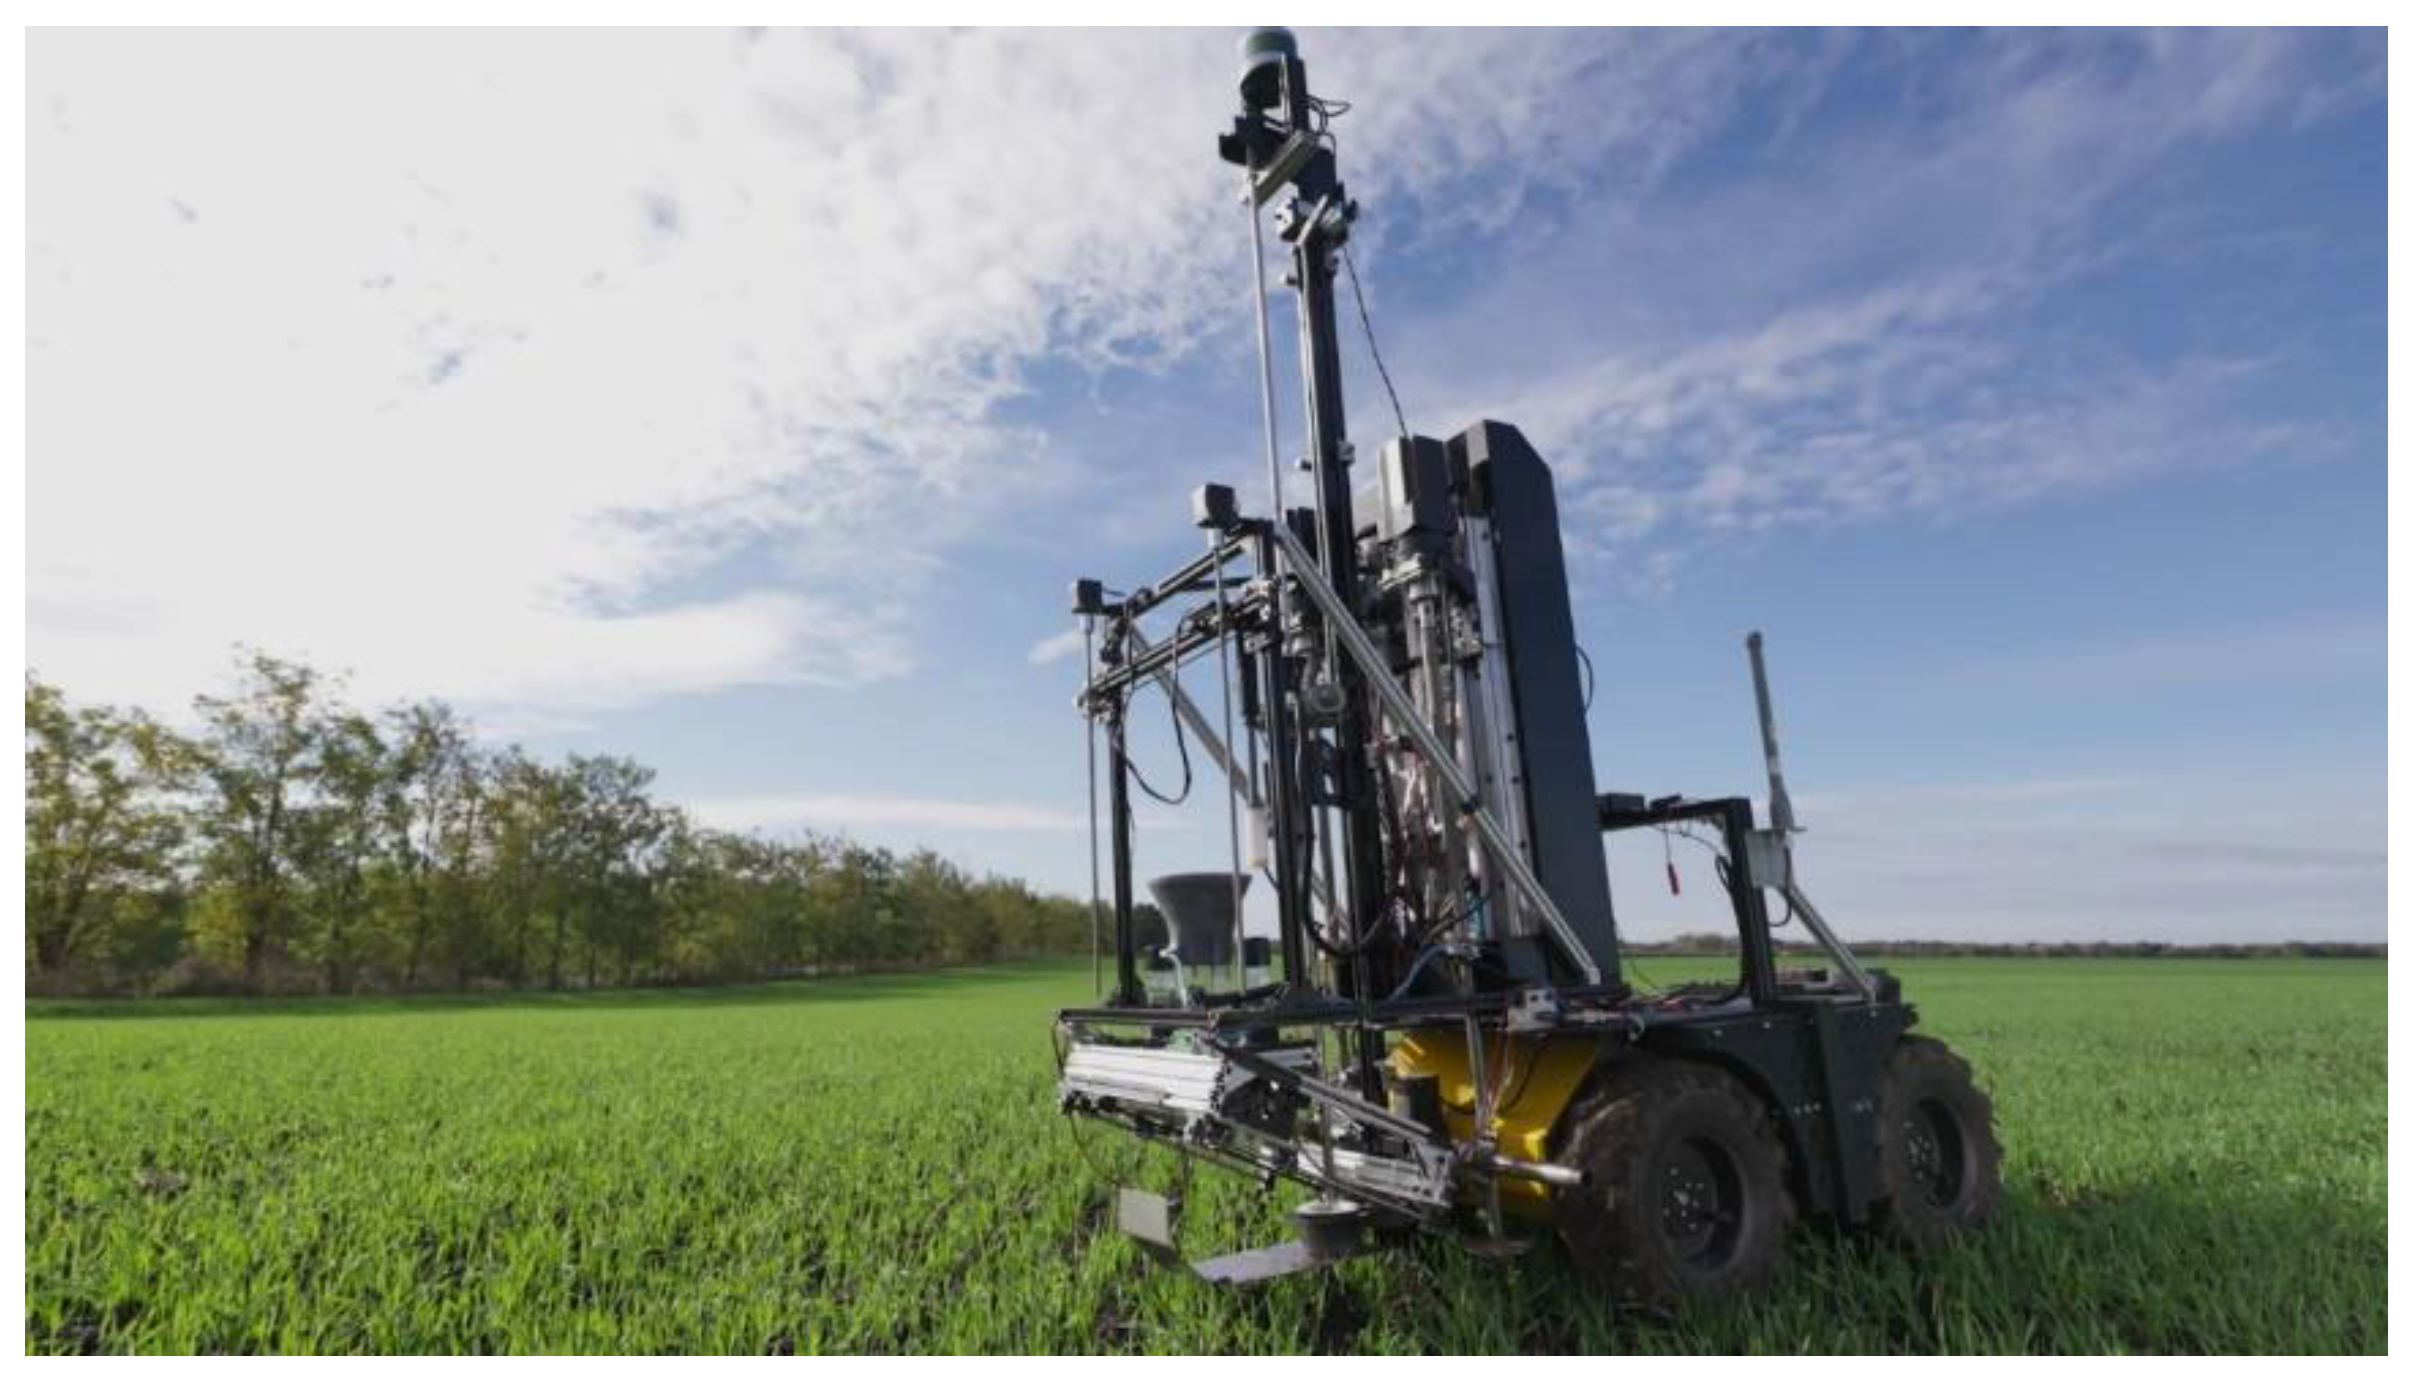 Sensors | Free Full-Text | Agrobot Lala&mdash;An Autonomous Robotic System  for Real-Time, In-Field Soil Sampling, and Analysis of Nitrates